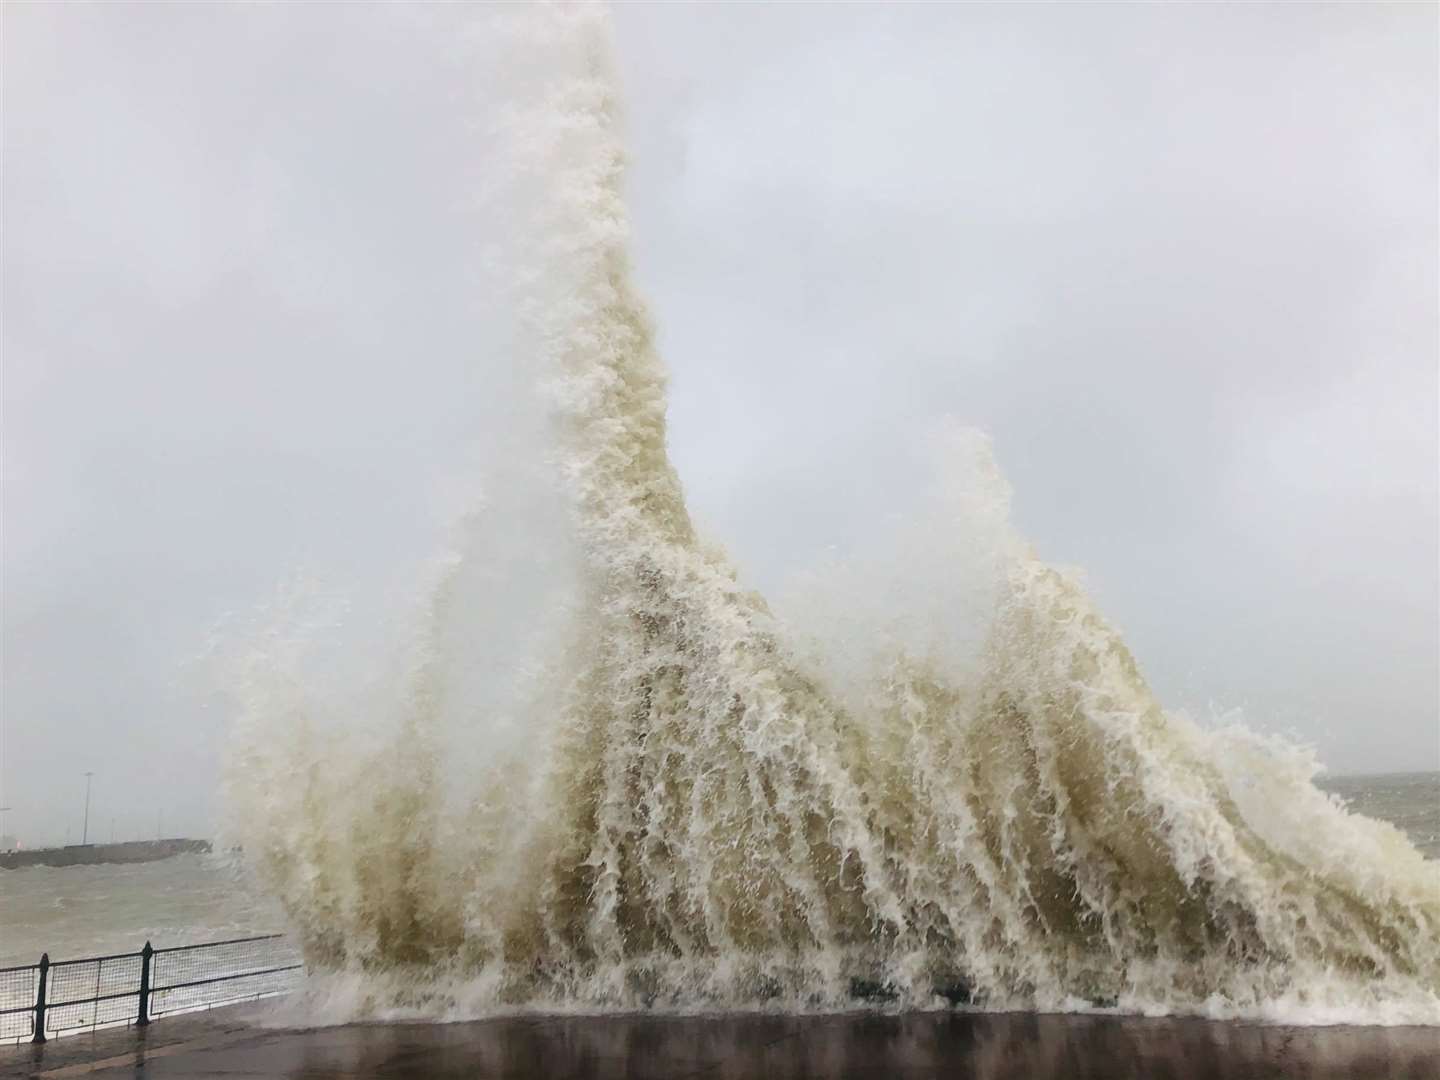 The high winds are expected to cause huge waves. Photo credit: Gary Ford